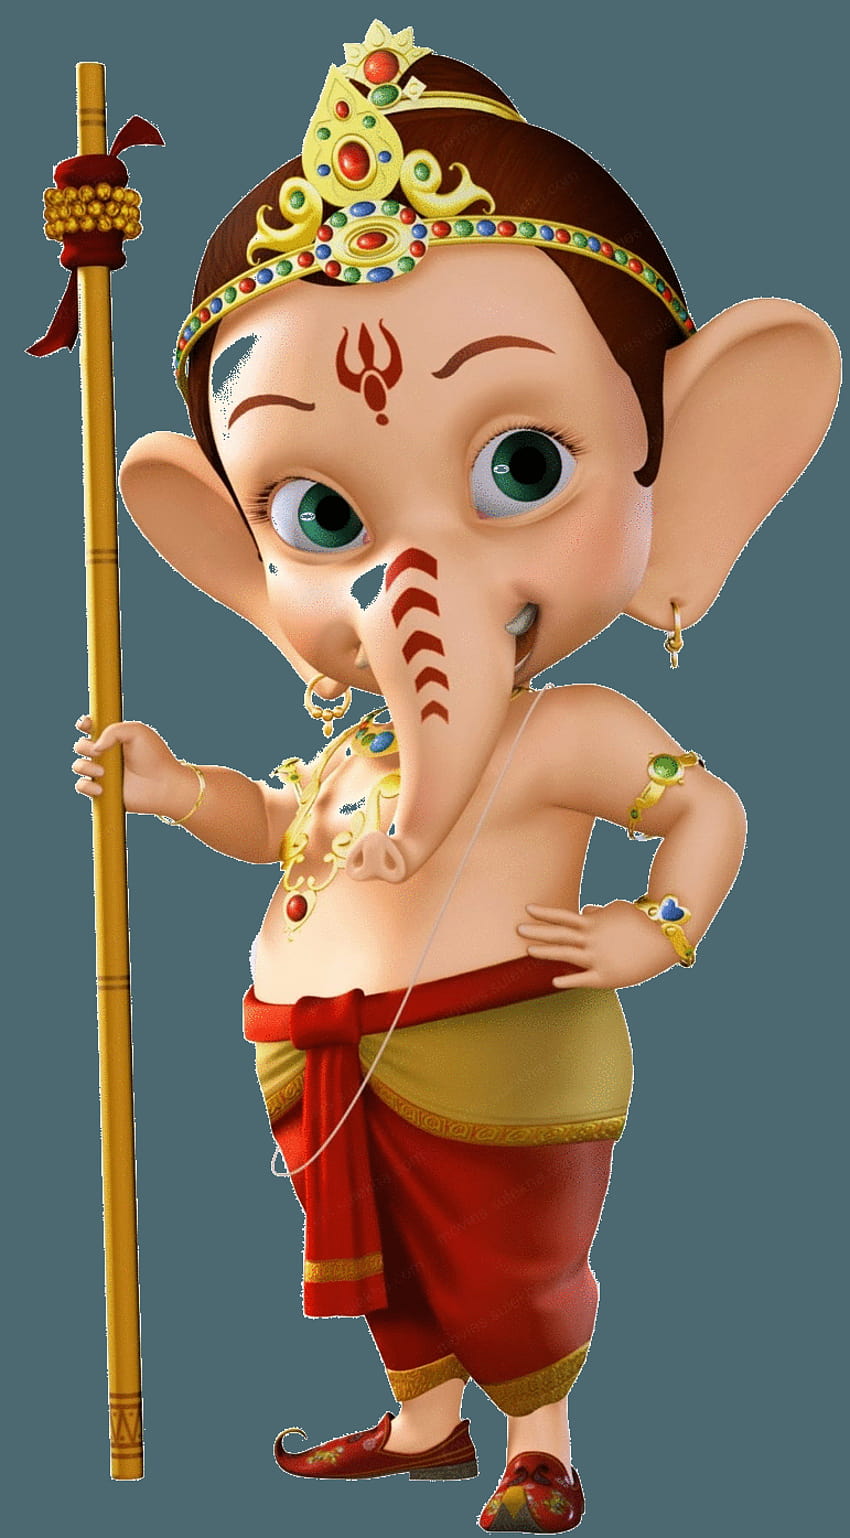 Incredible Collection of 999+ Little Ganesha Images in Full 4K Resolution